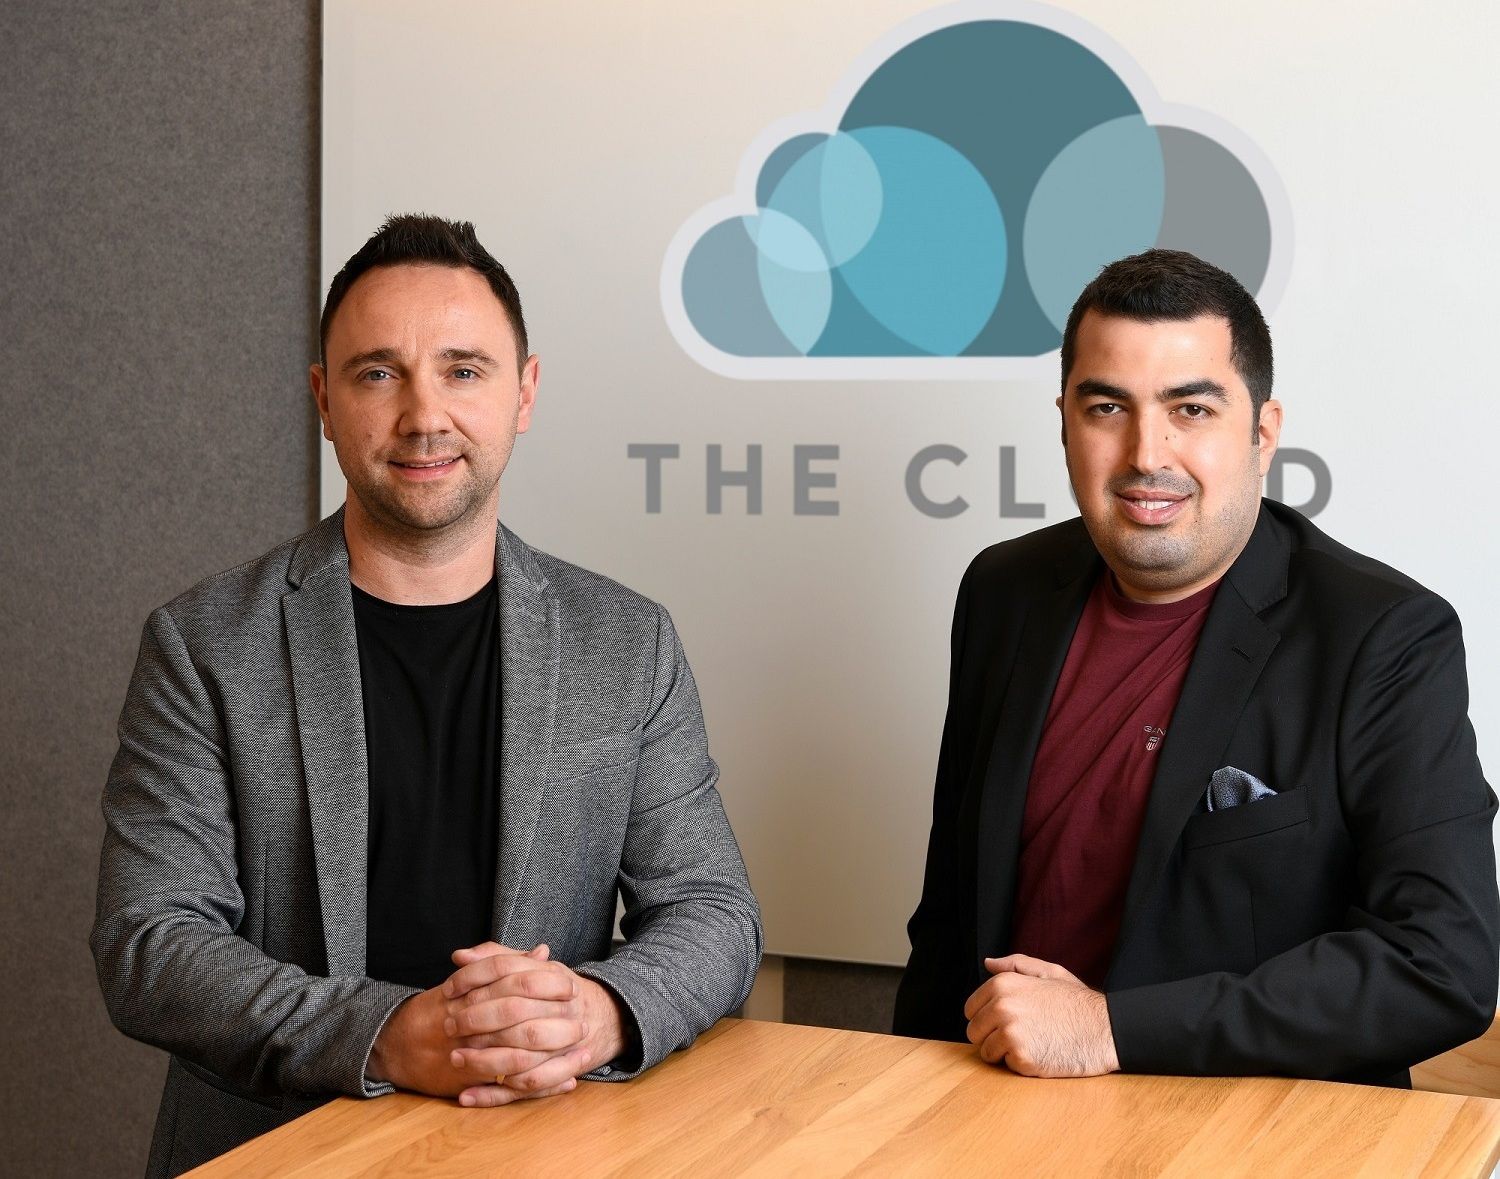 UAE-Based The Cloud Raises $12M Series B to Scale and Expand its Cloud Kitchen Offerings Globally